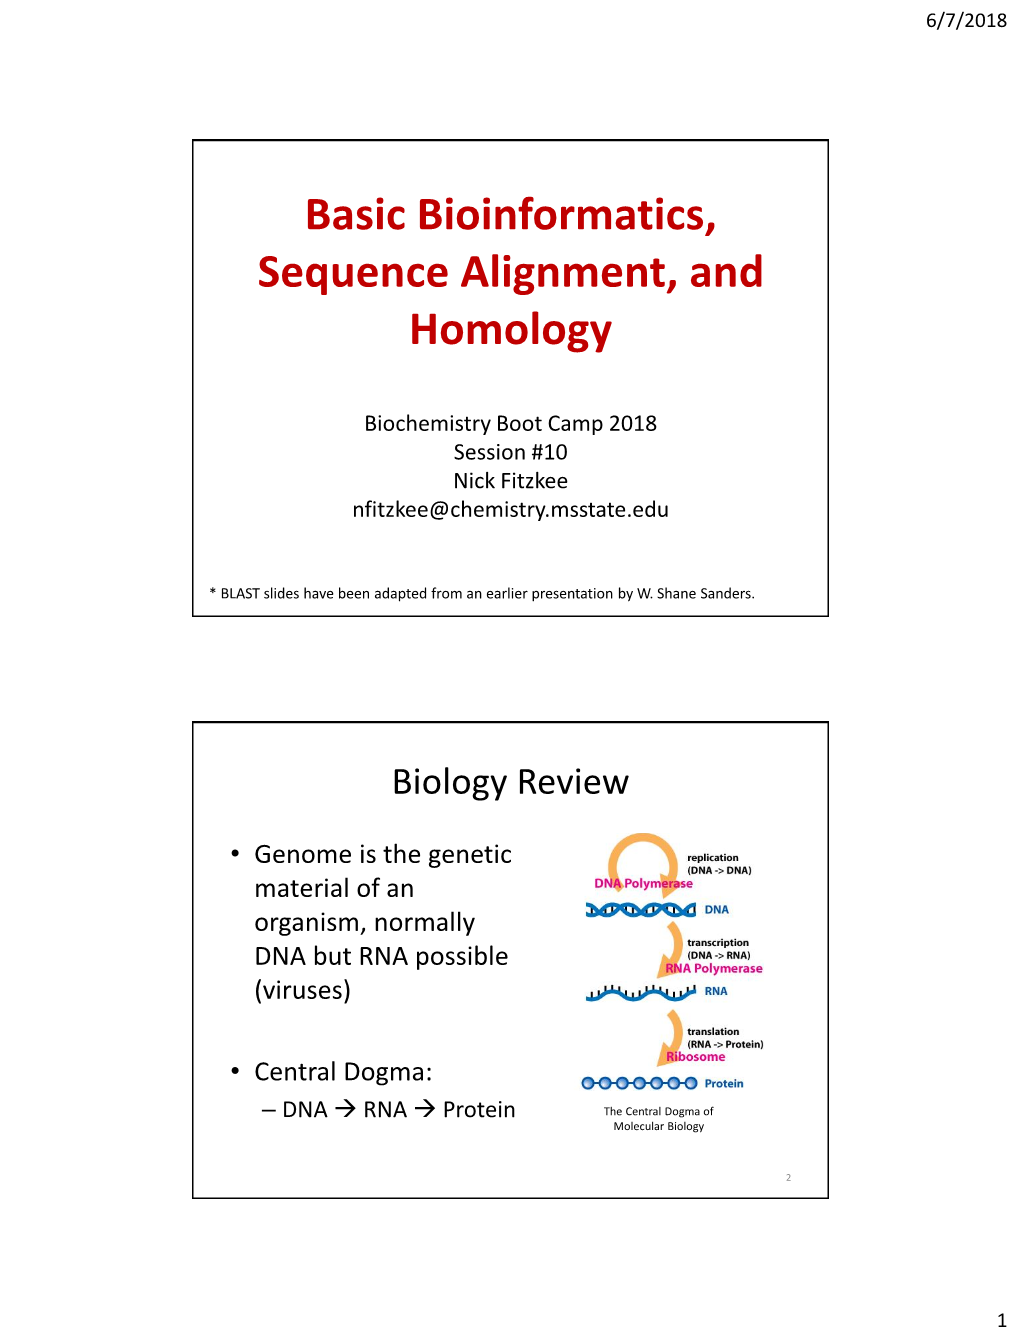 Basic Bioinformatics, Sequence Alignment, and Homology